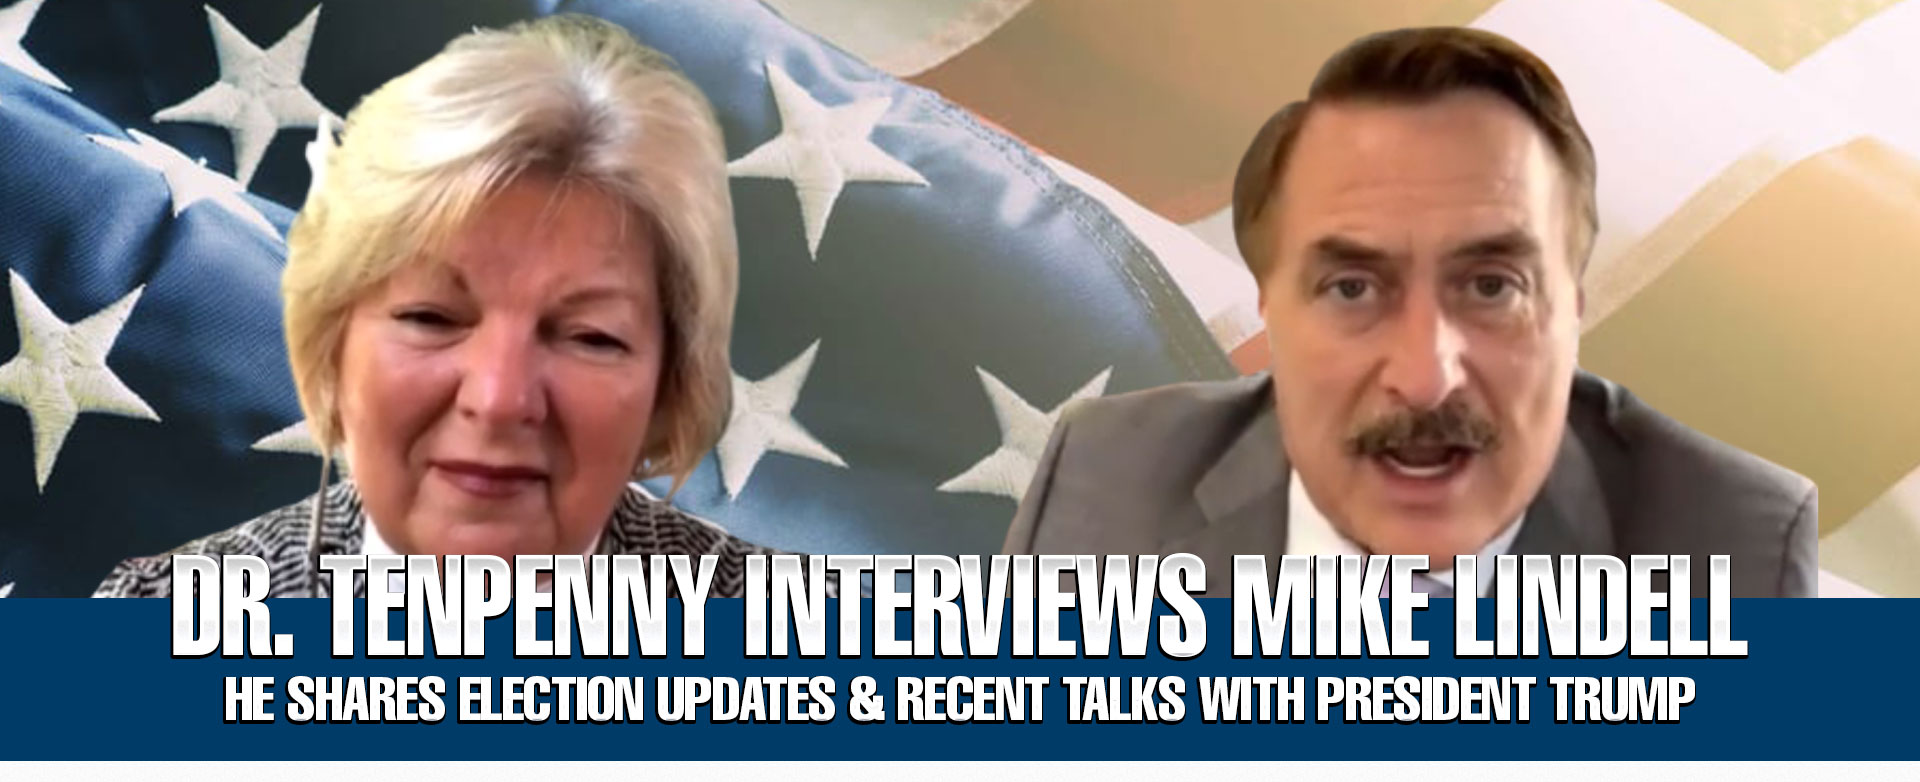 MyPariotsNetwork-Dr. Tenpenny Interviews Mike Lindell & He Shares Election Updates & Recent Talks With President Trump